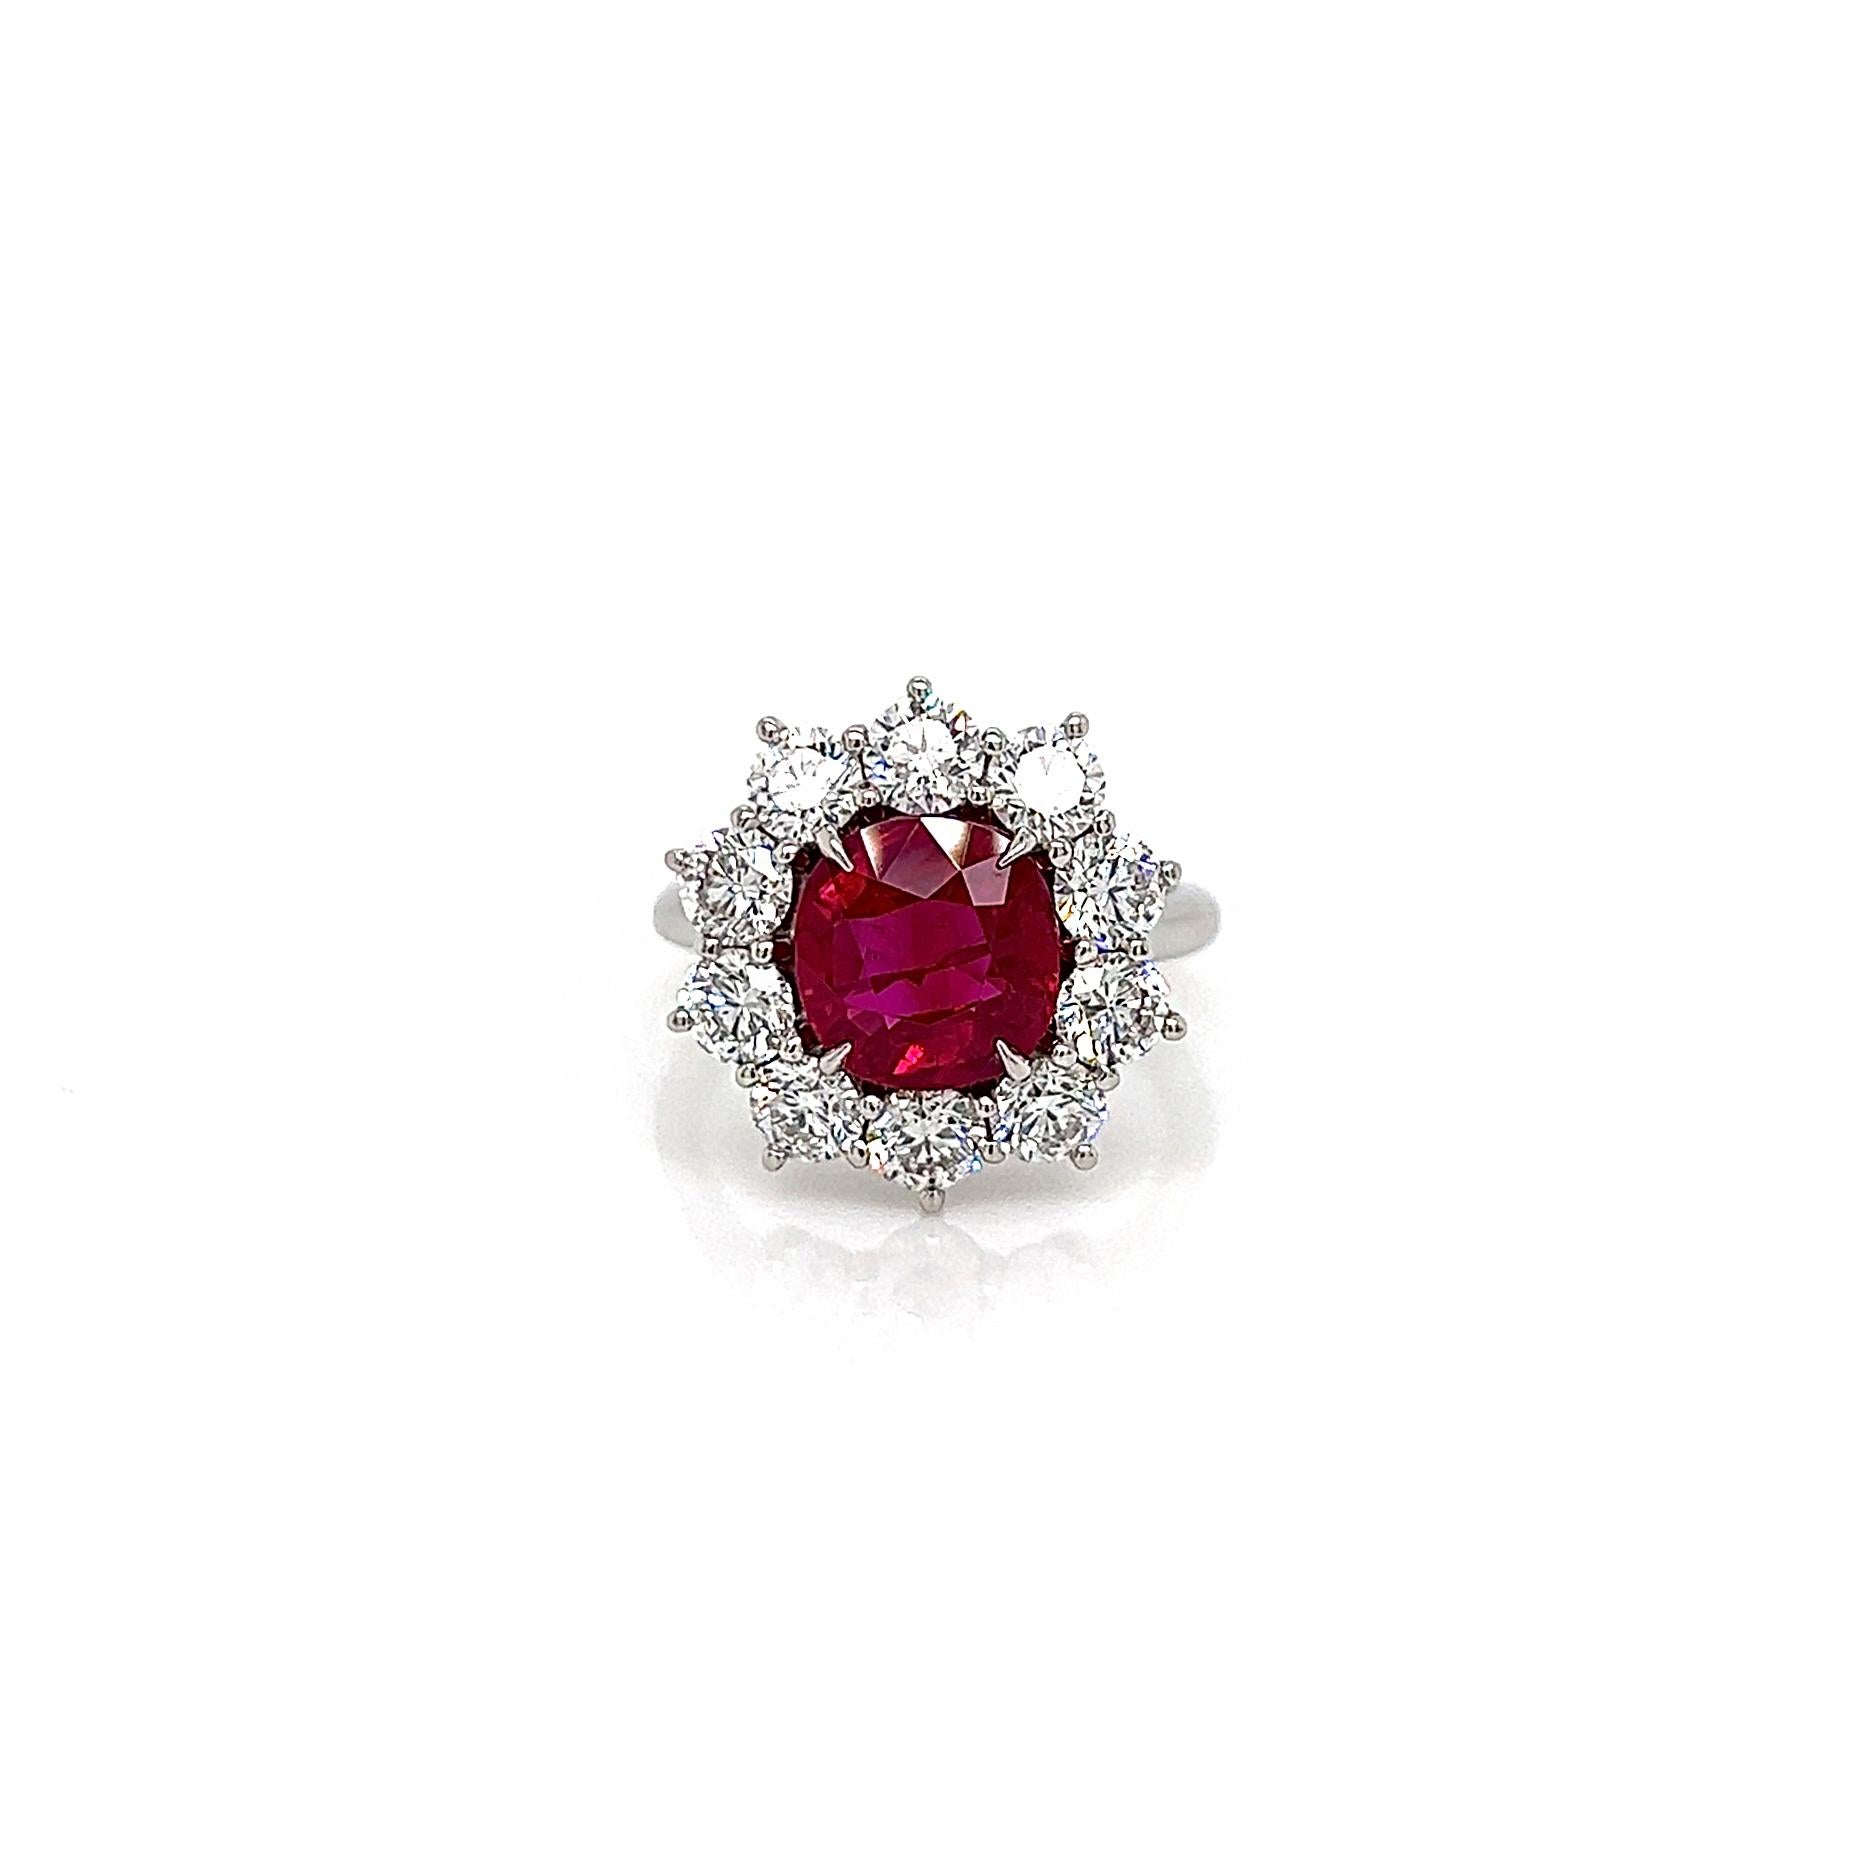 4.90 Total Carat Ruby and Diamond Halo Ladies Ring. GRS Certified.

True collectors item our 